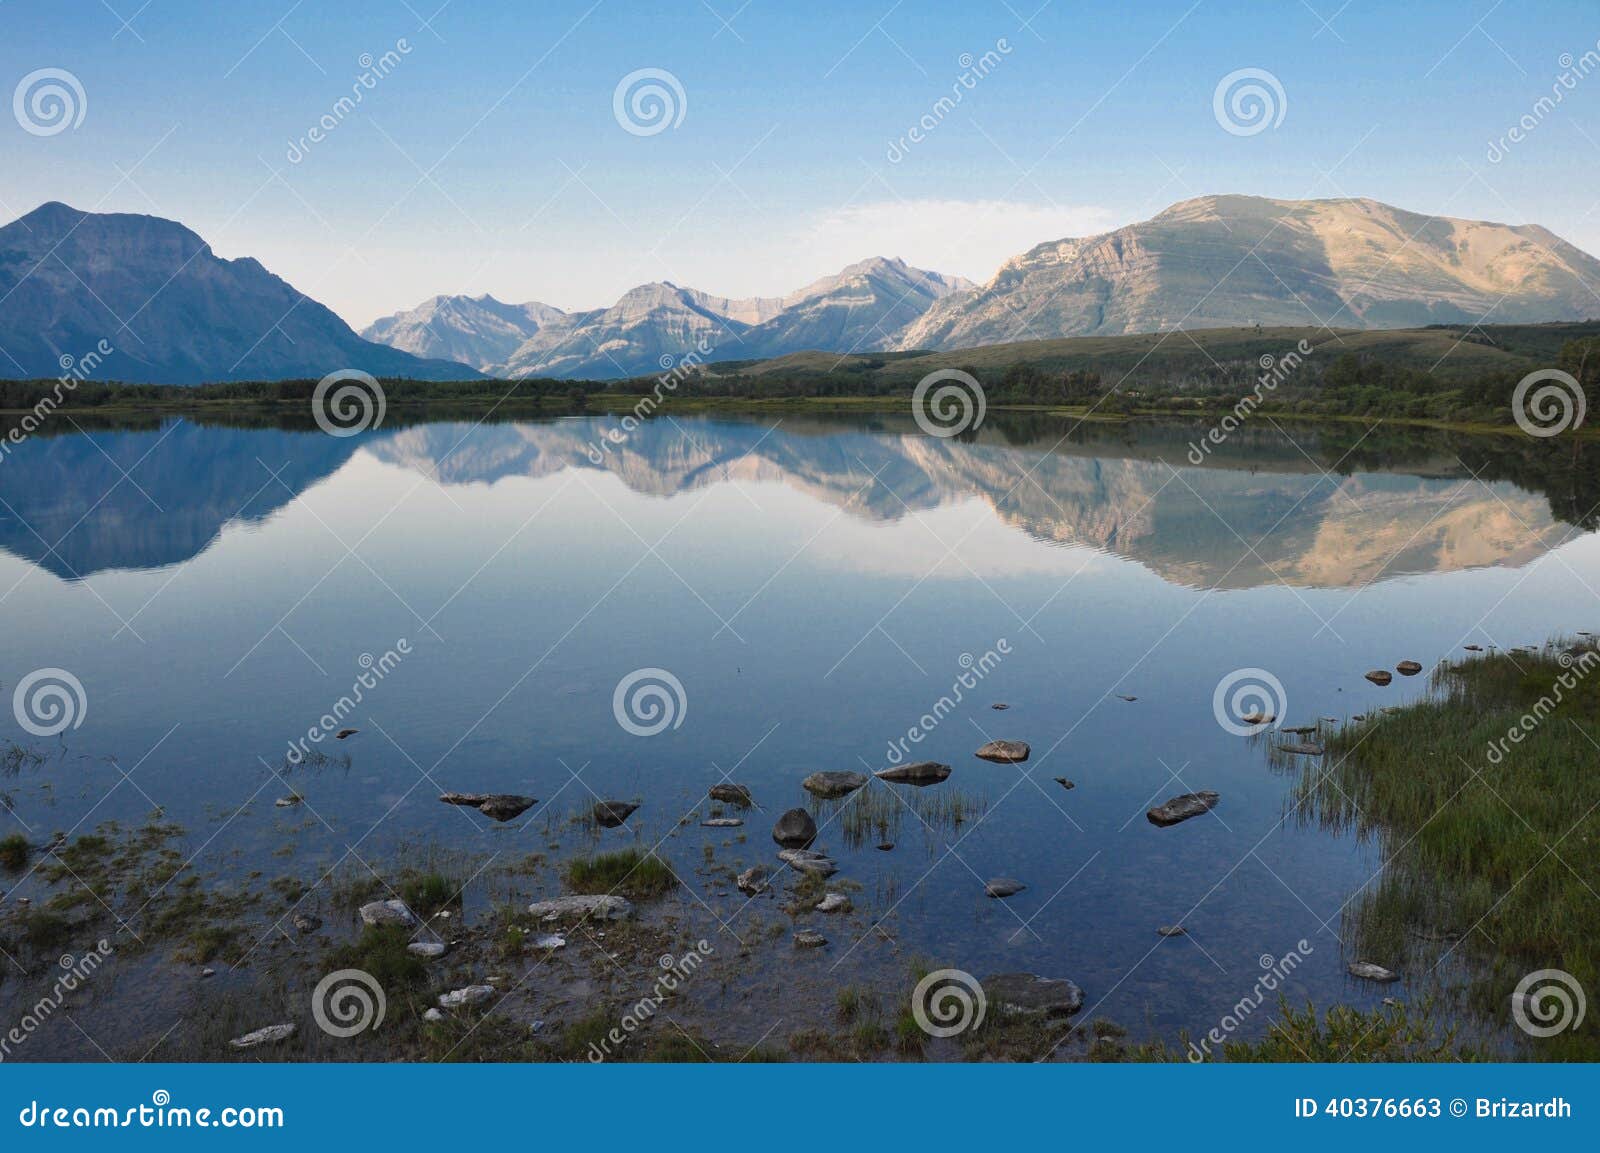 reflection at a rendez-vous in alberta, canada